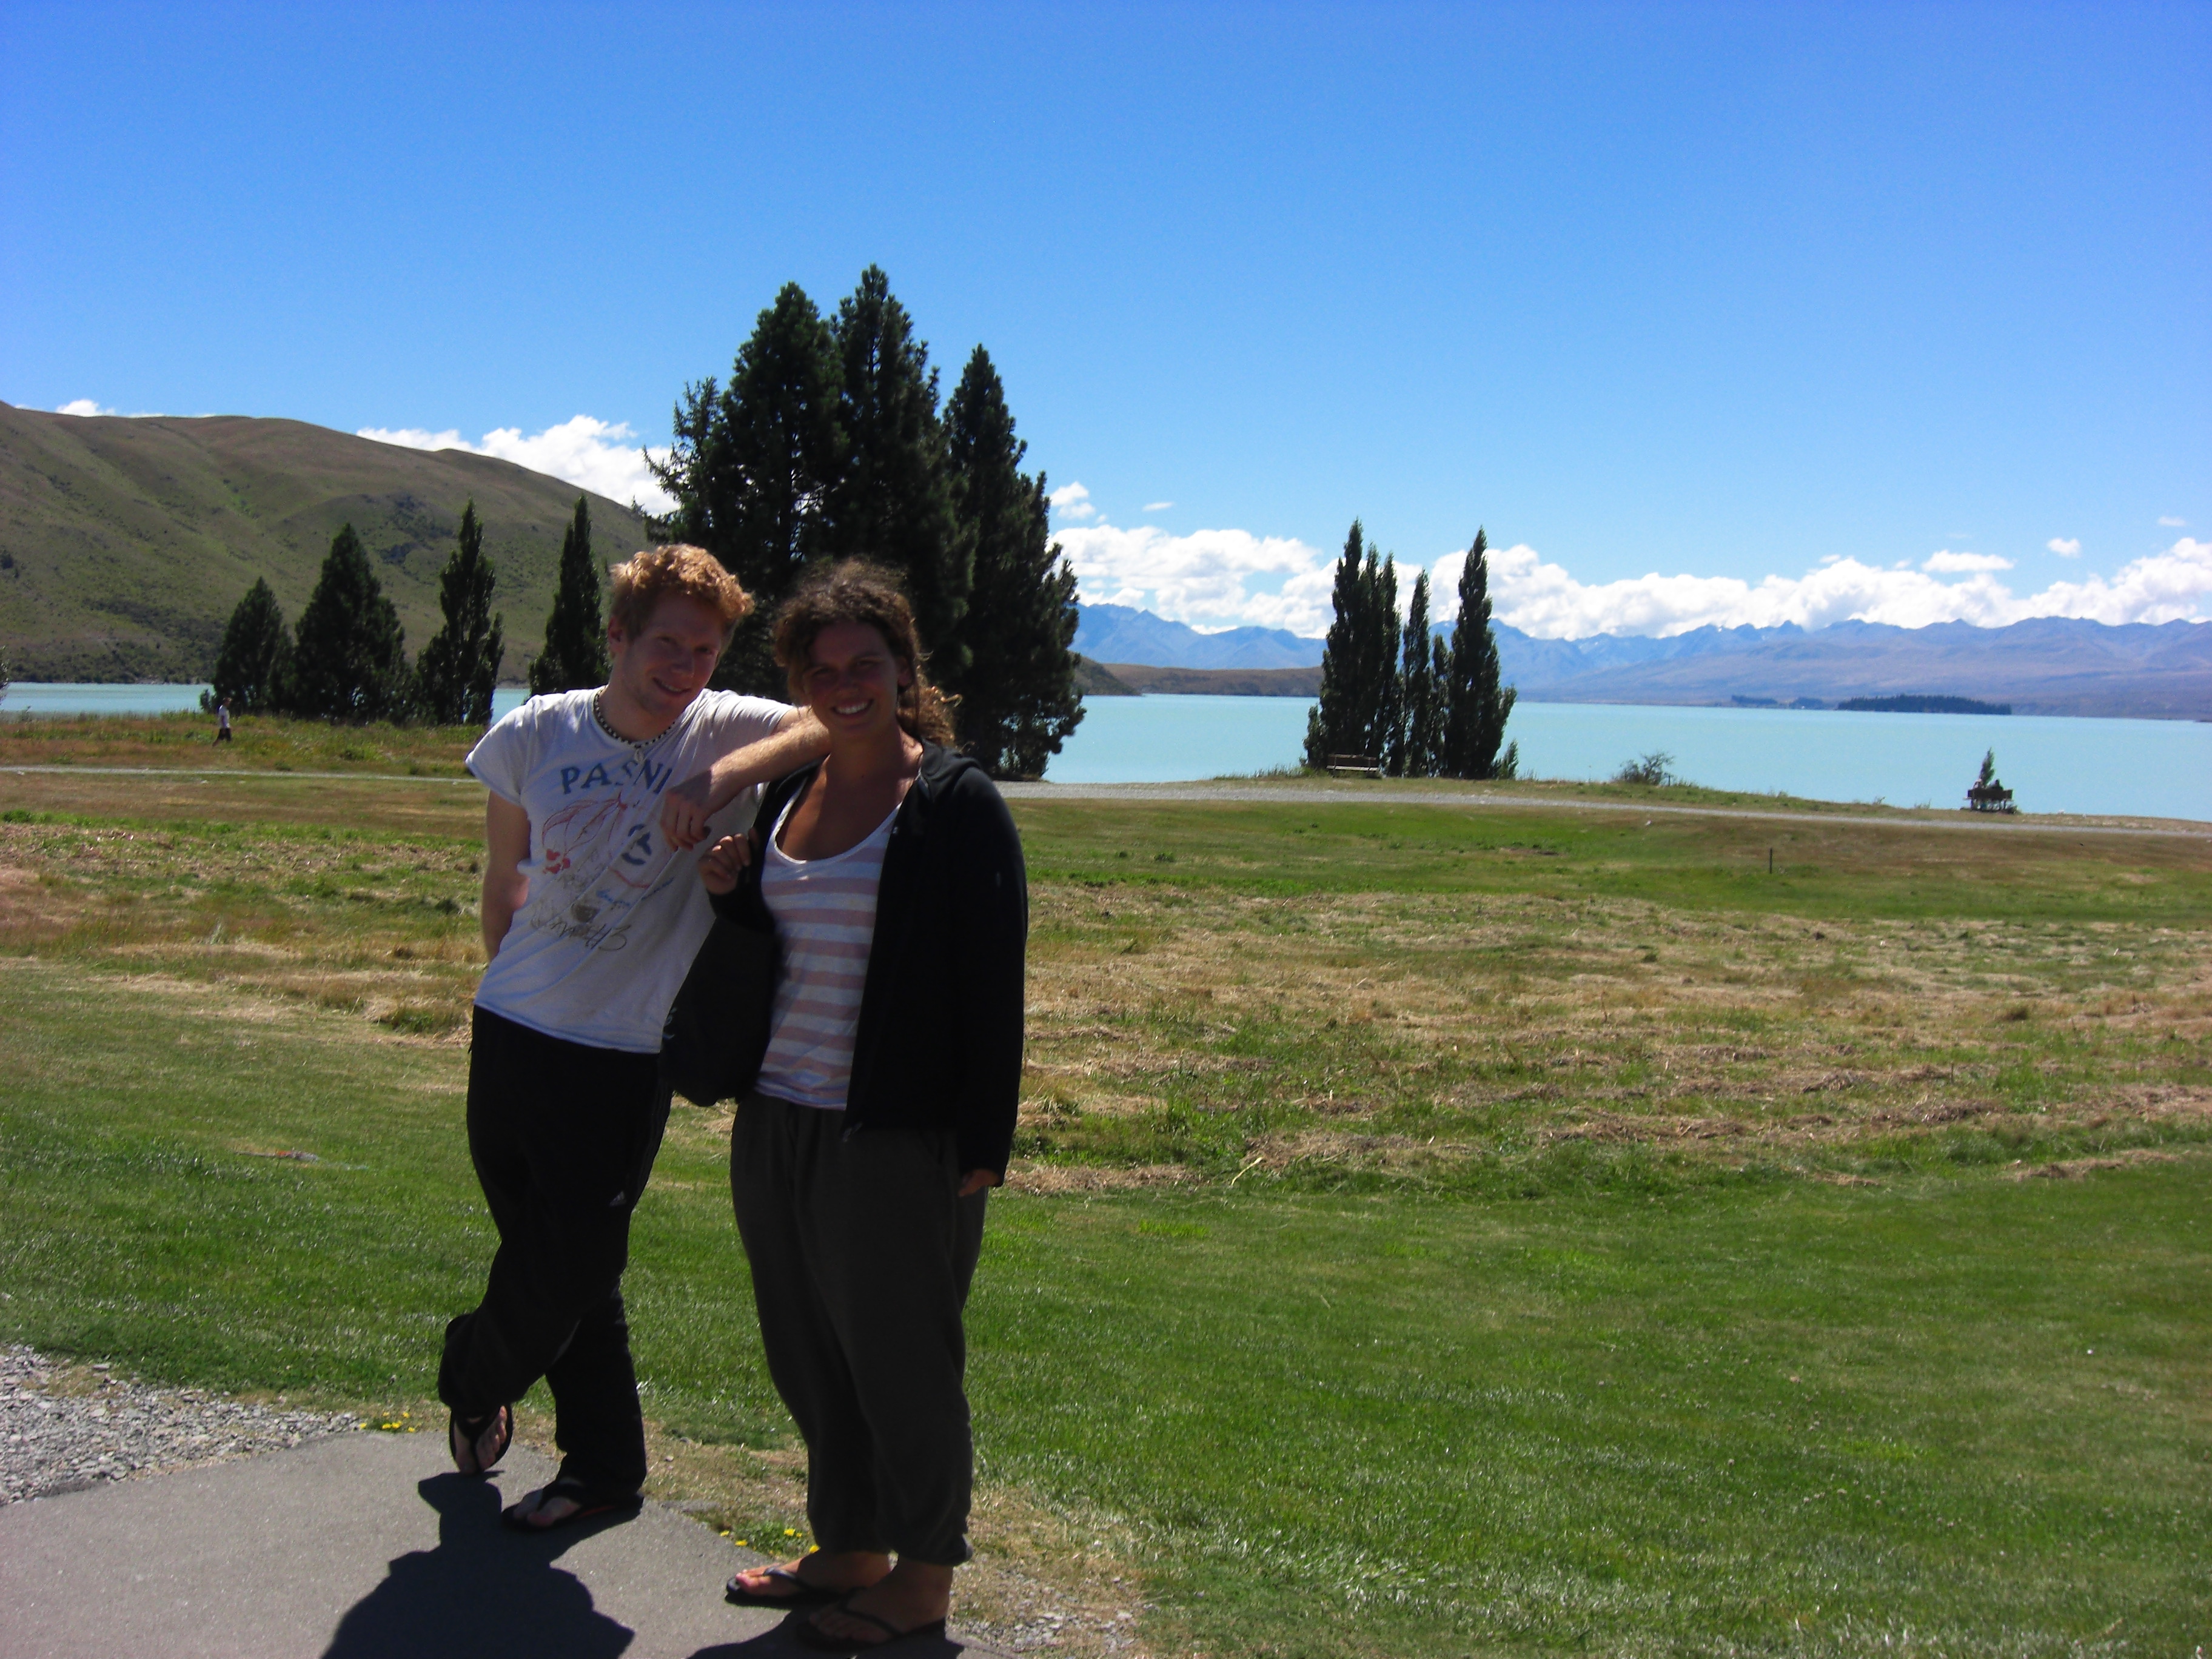 Mt Cook area. Break during bus ride to Lake Wanaka